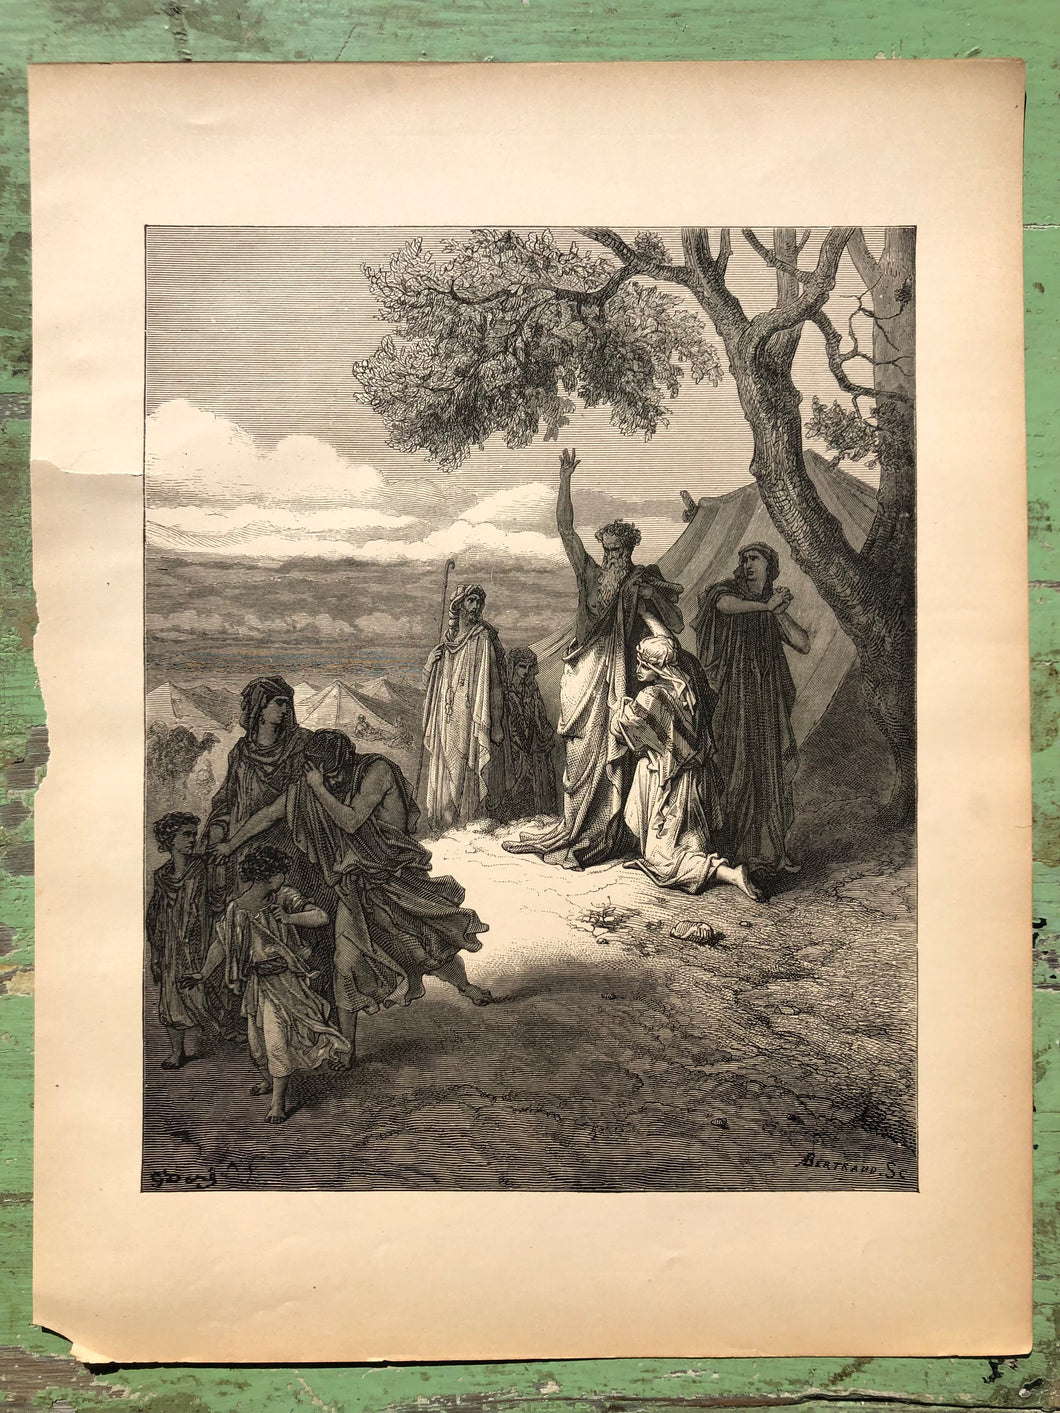 Noah Cursing Ham. From The Dore Bible Gallery by Gustave Dore